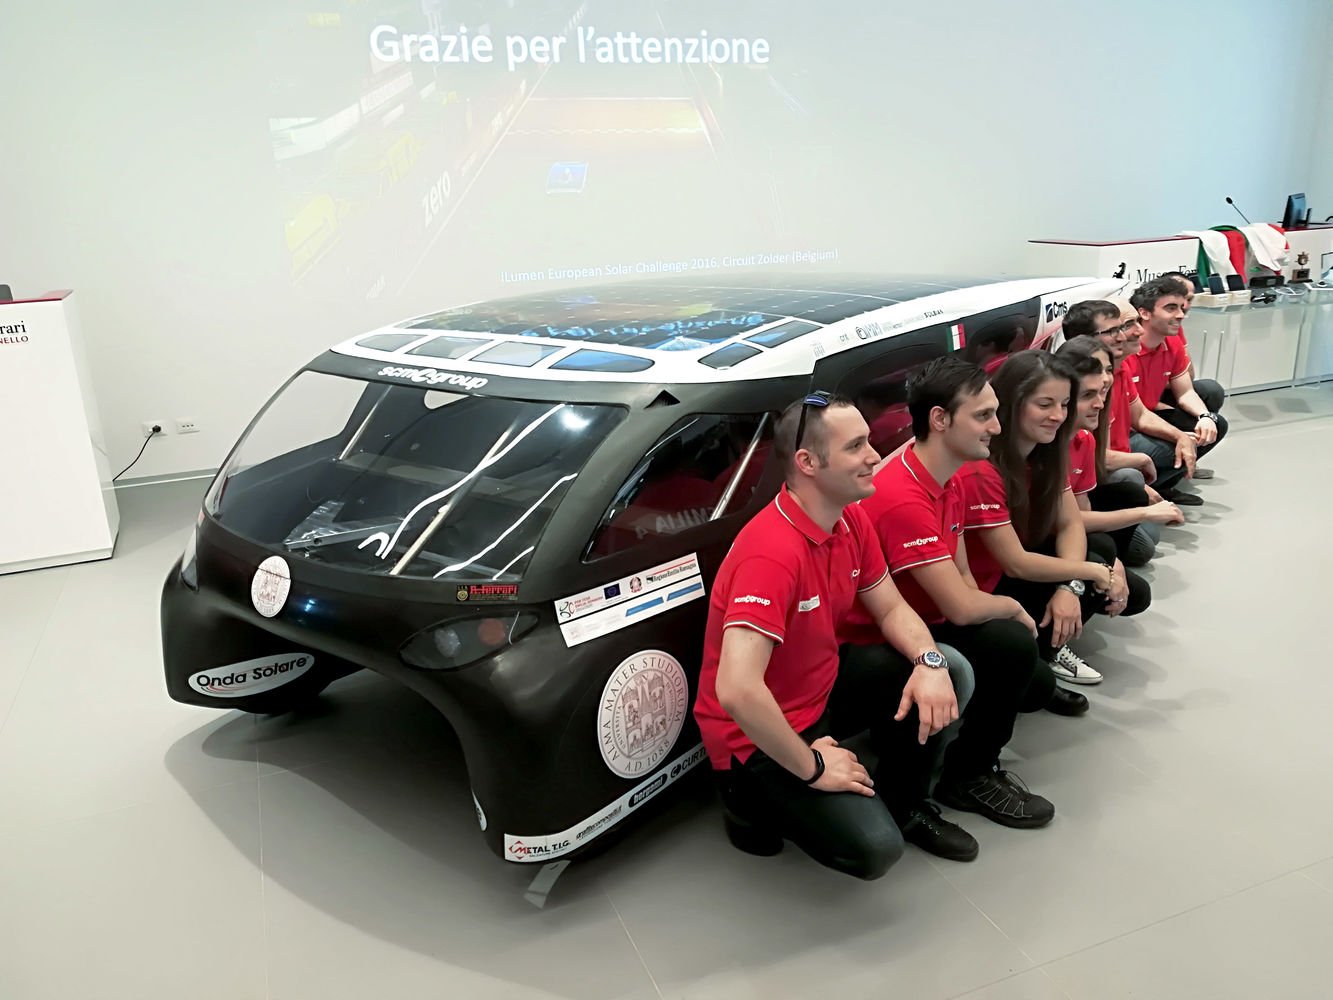 Scm Group and the University of Bologna take up the “solar” challenge together 